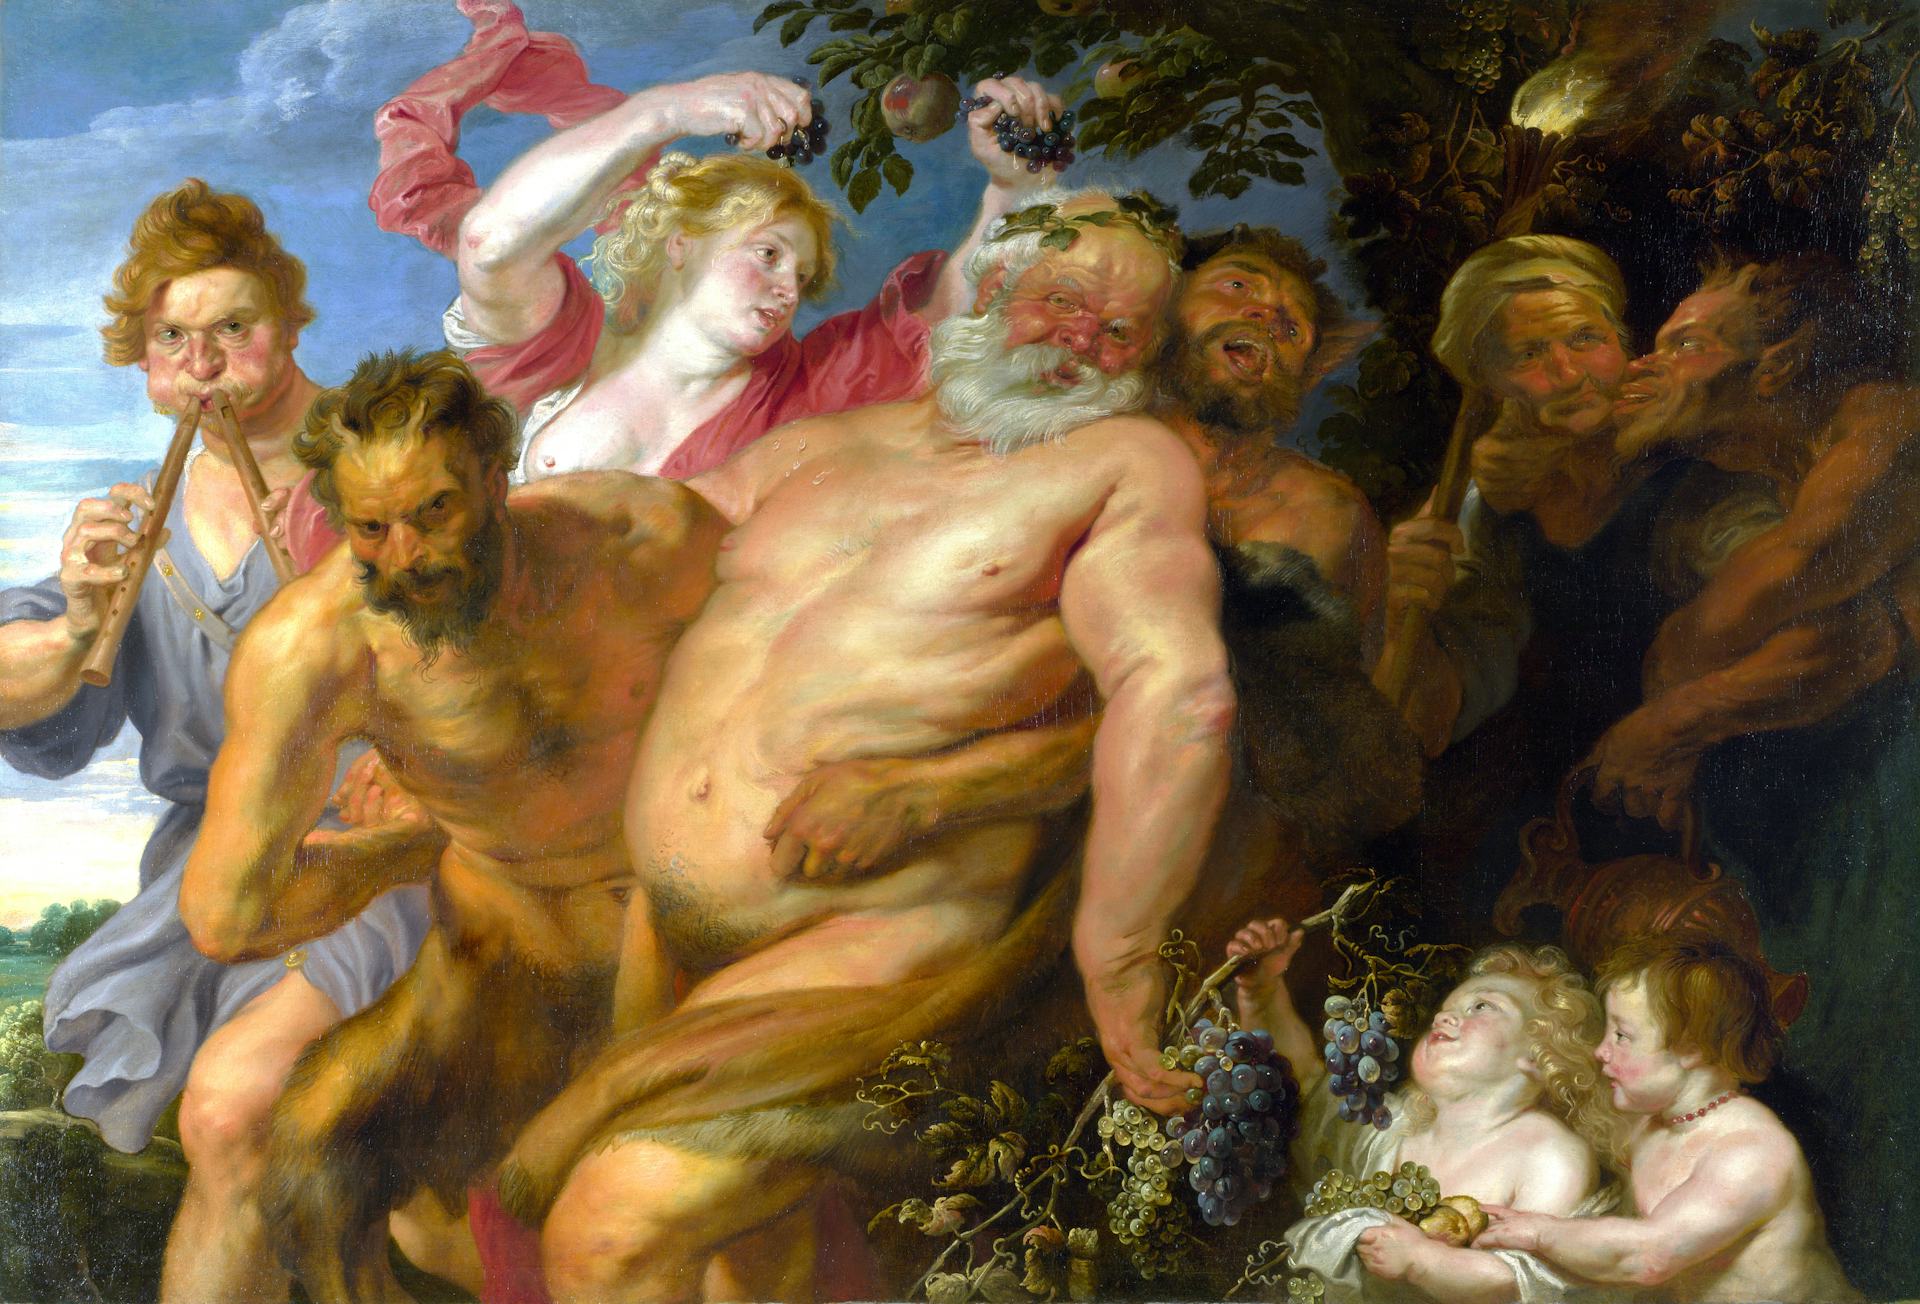 Drunken Silenus supported by Satyrs attributed to Anthony van Dyck (ca. 1620)